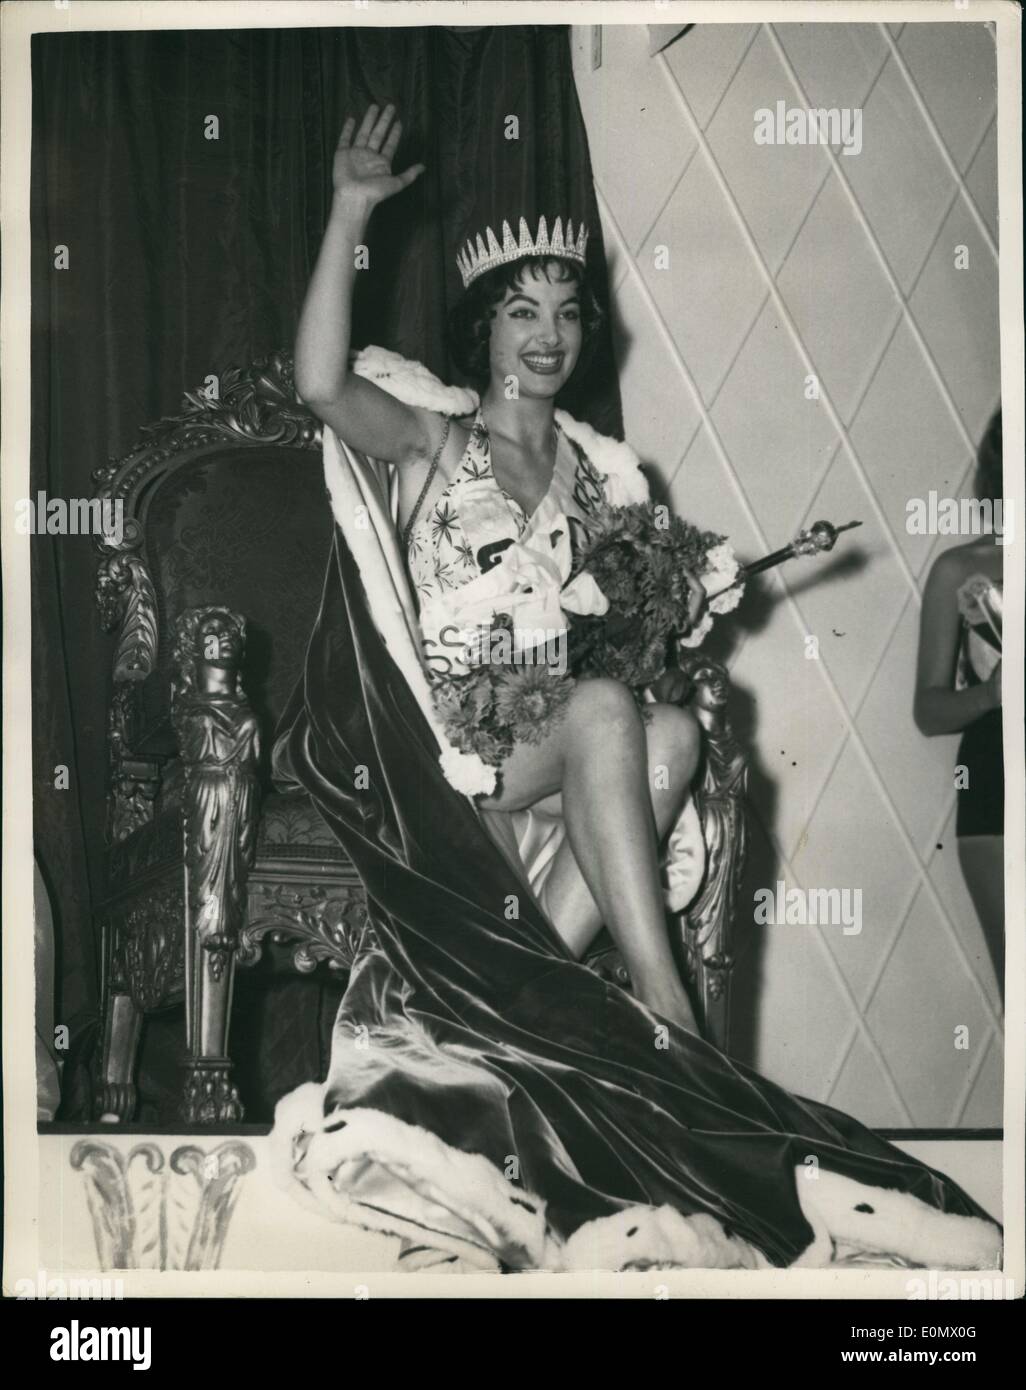 Oct. 10, 1956 - Miss Germany is elected ''Miss World'' from 24 contestants at the Lyceum Ballroom. Photo shows Petra Schurmann, Stock Photo